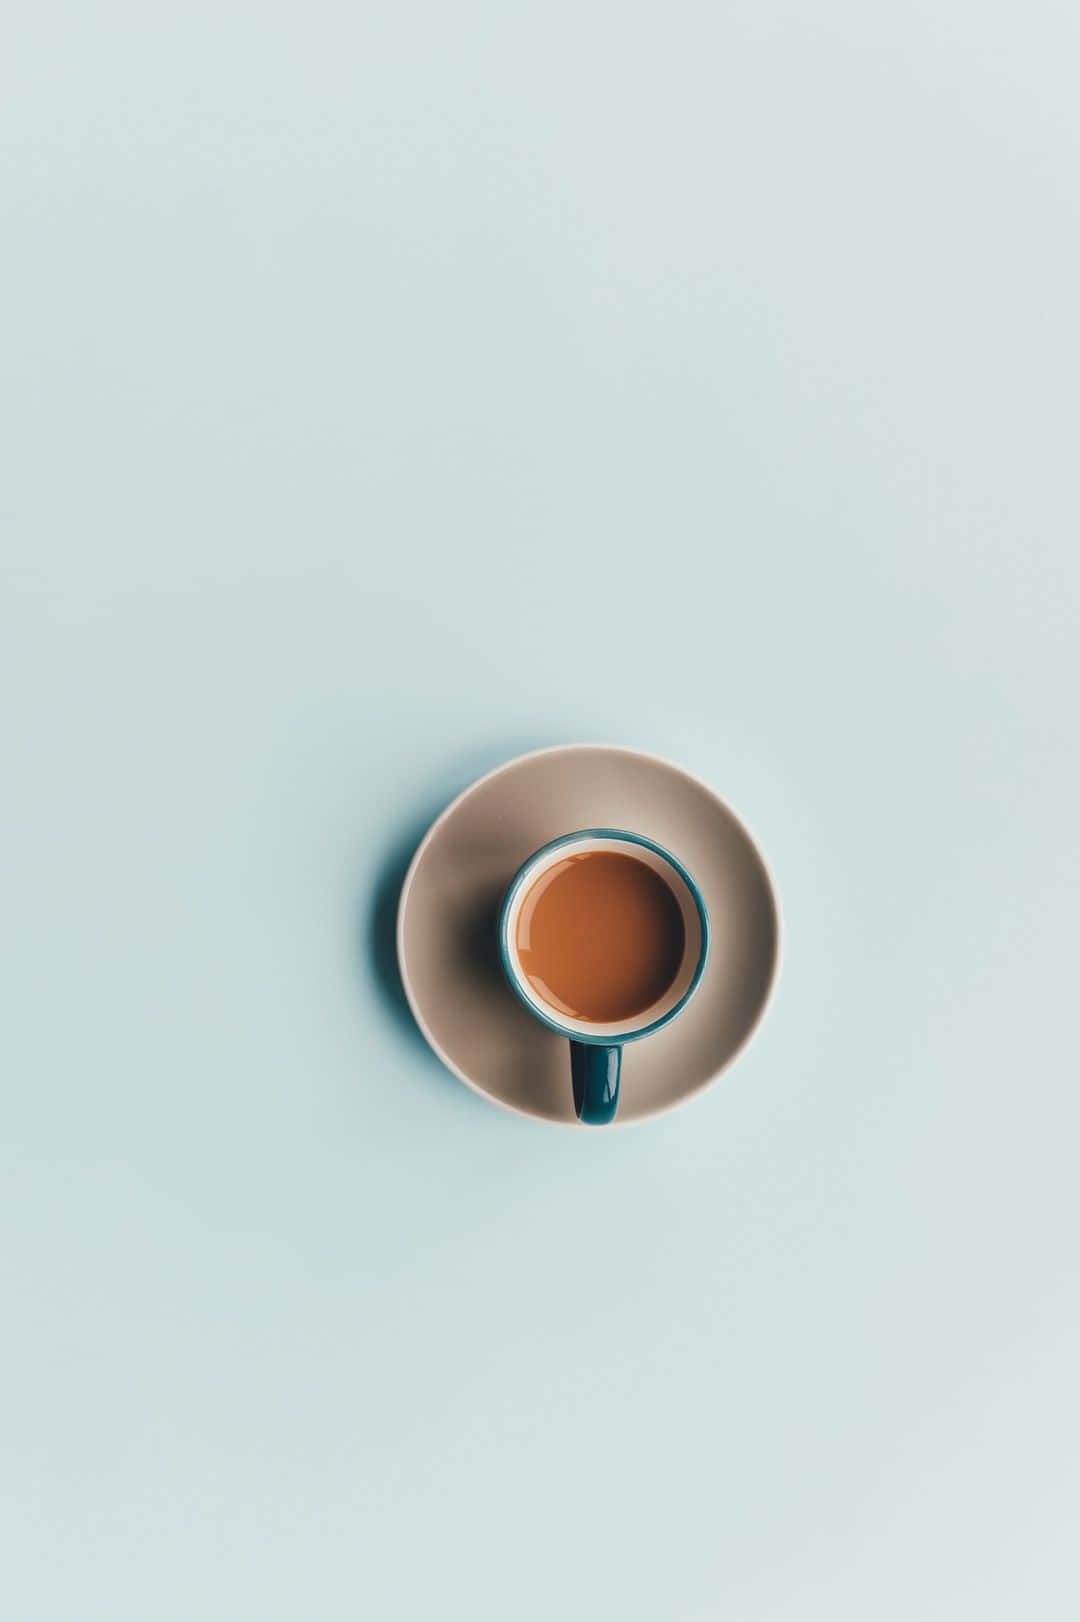 Morning Coffee and Beans in Minimalist Style Wallpaper